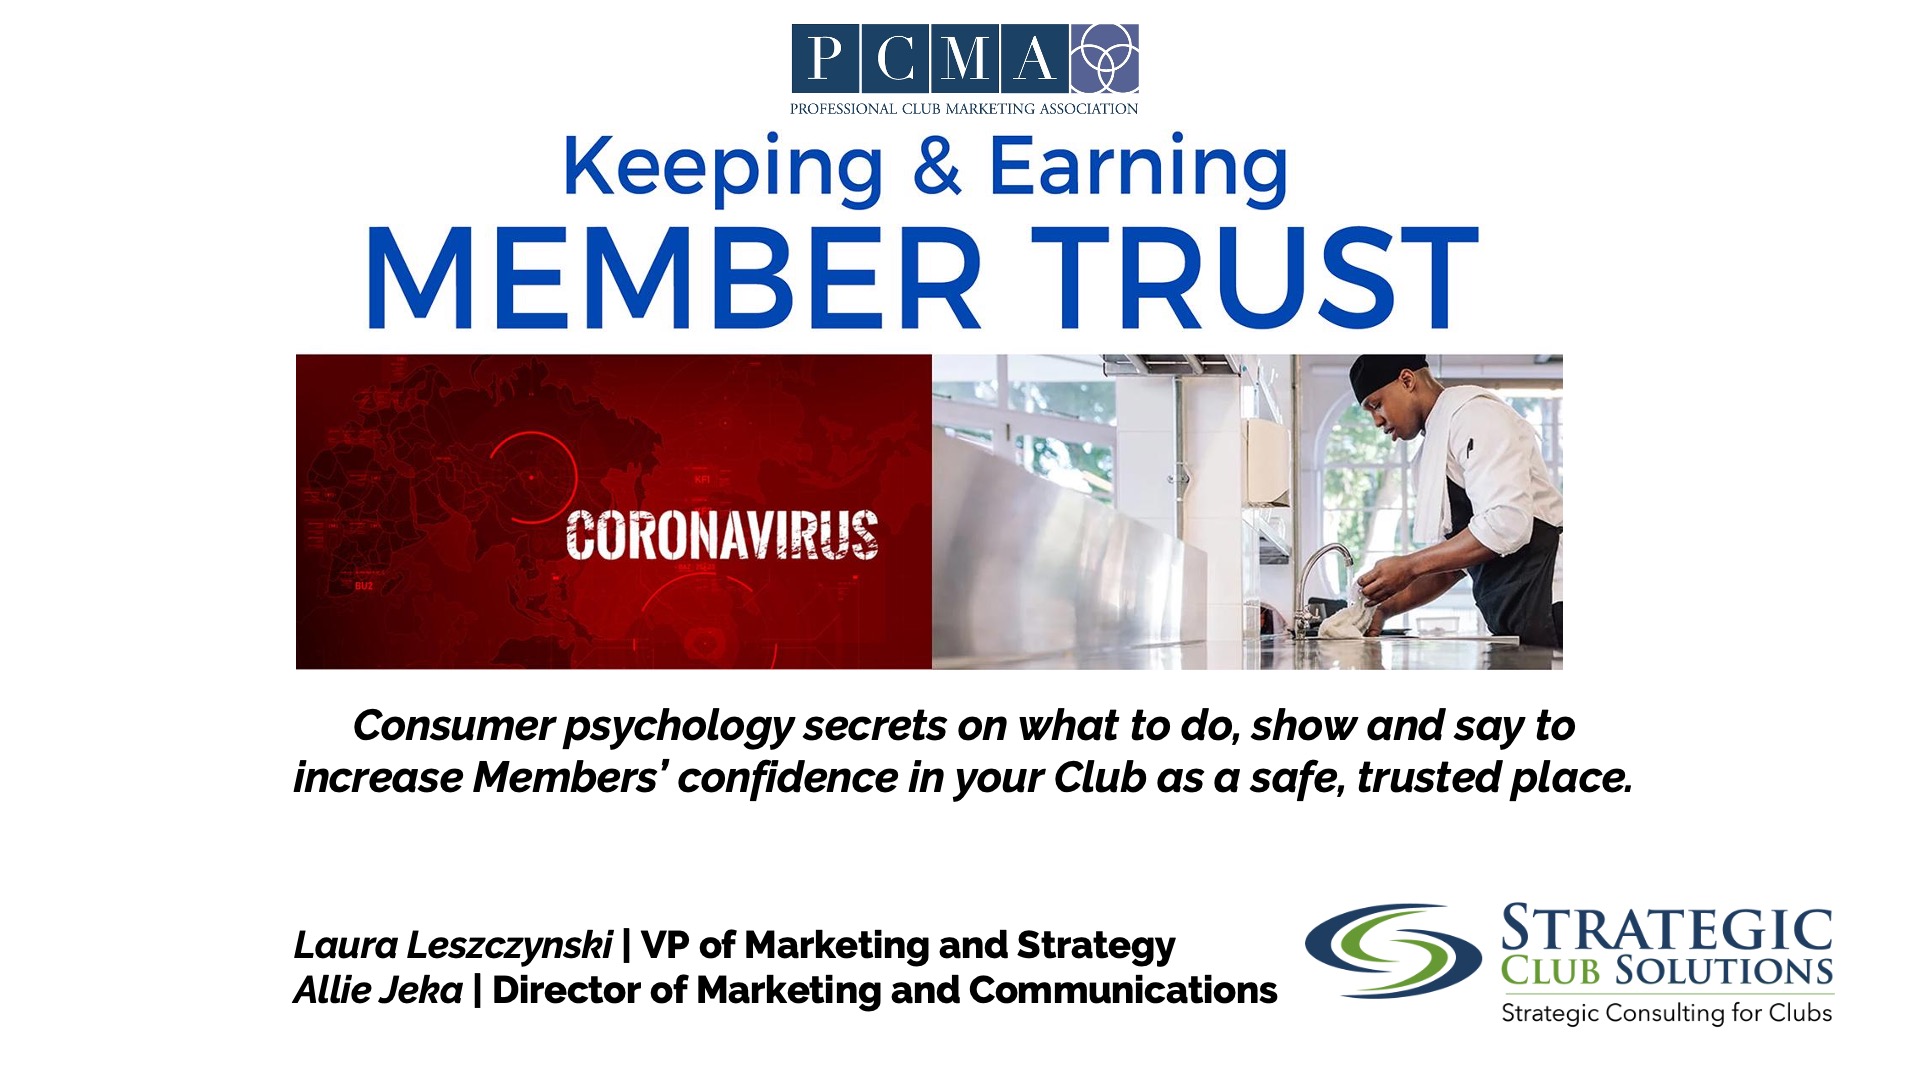 Keeping and earning Member Trust